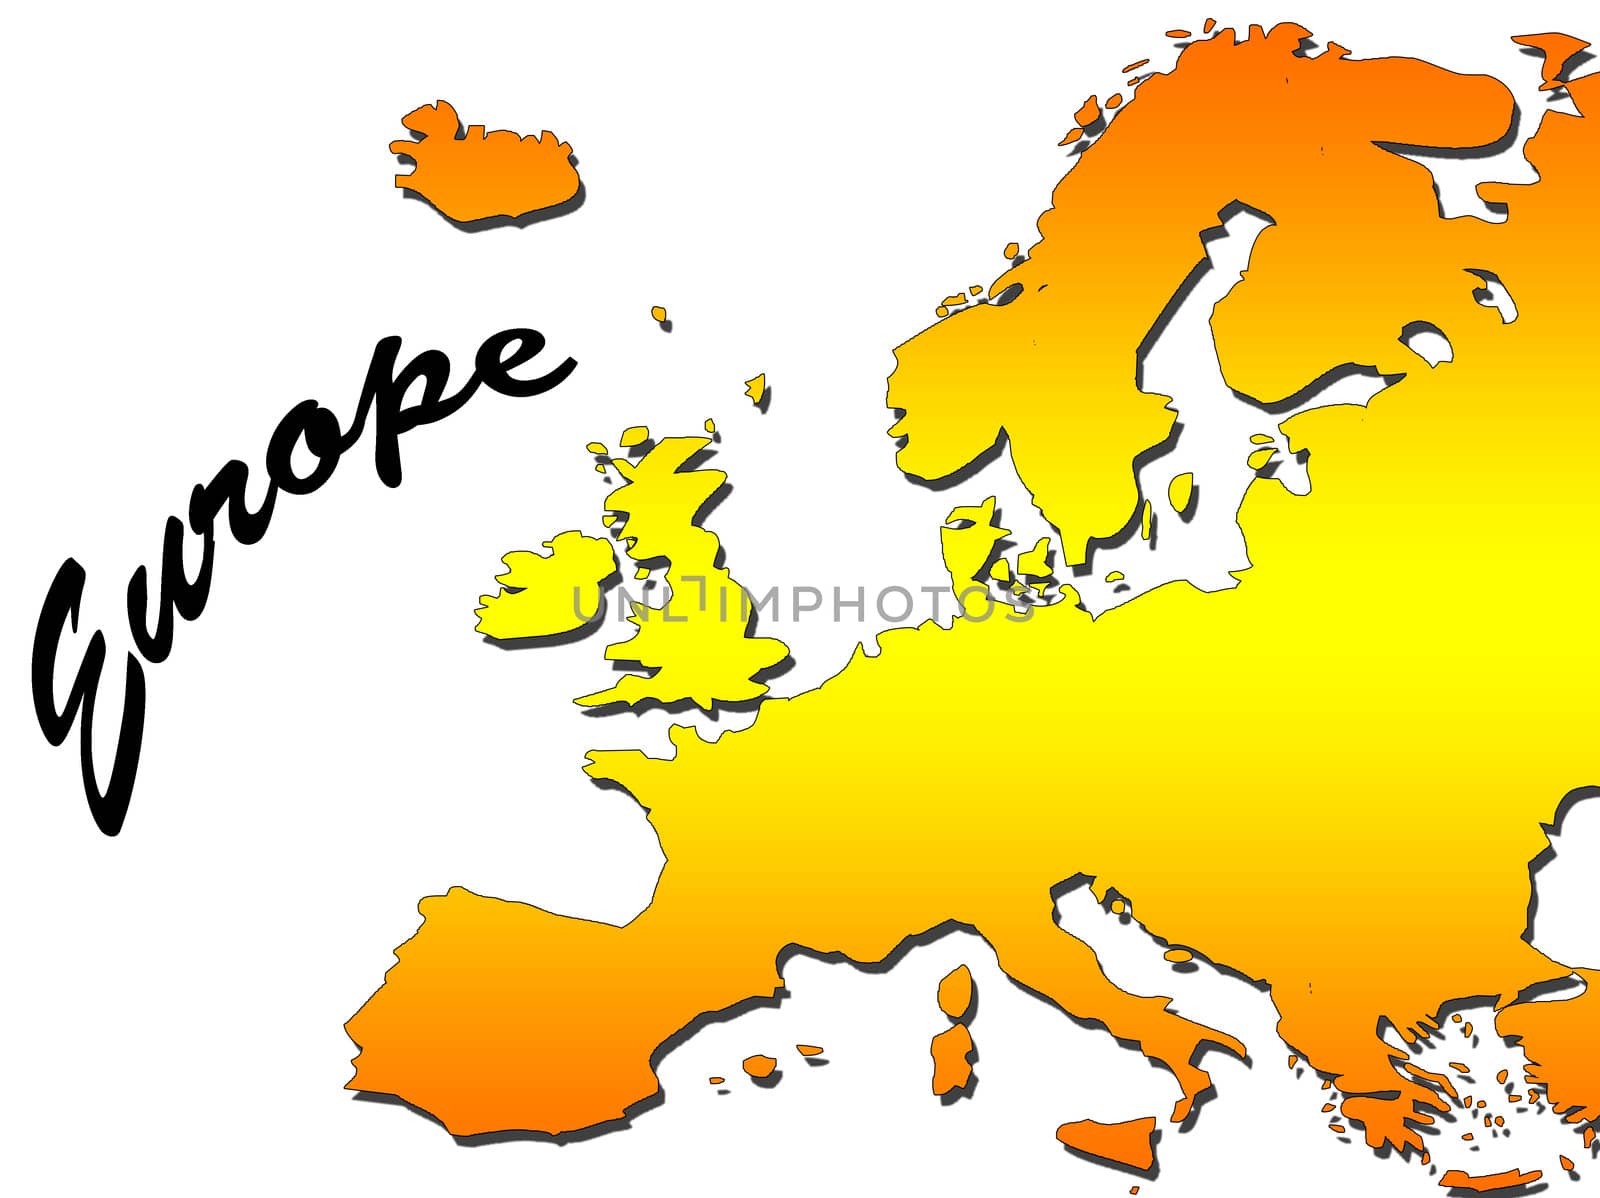 	
Europe map filled with orange gradient. Mercator projection.